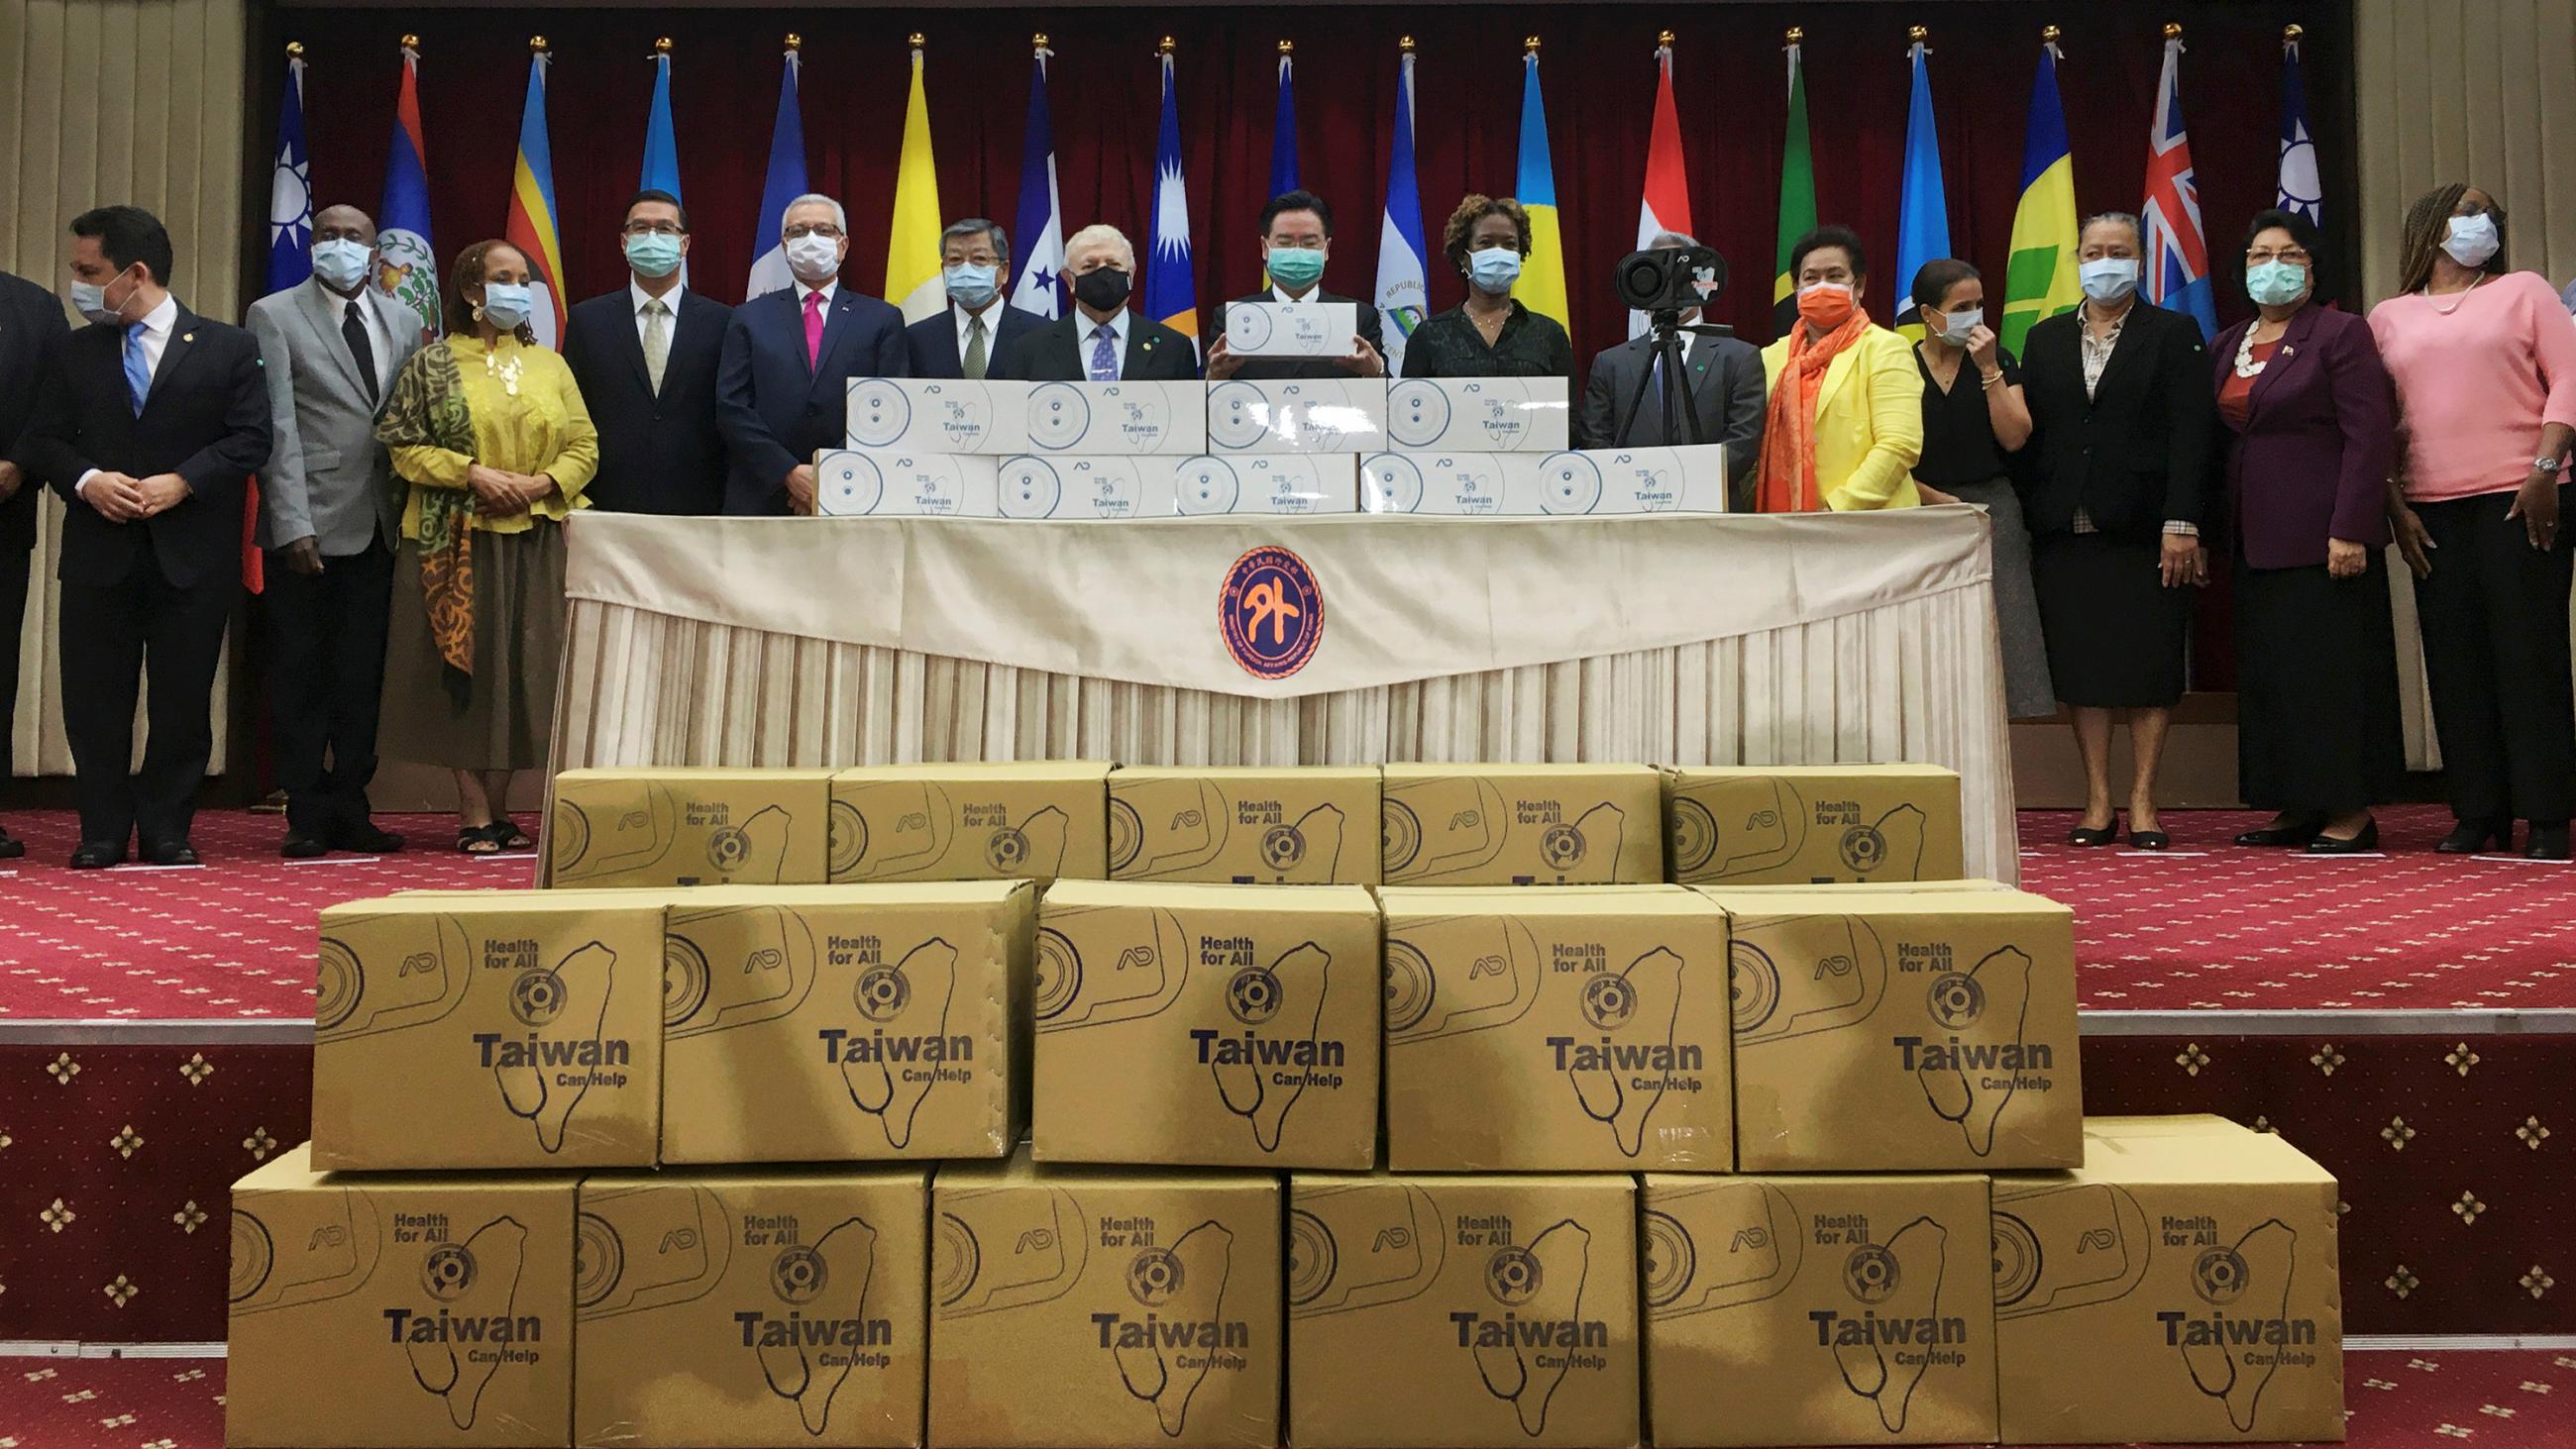 The photo shows a group of dignitaries amidst boxes of goods to be donated. 